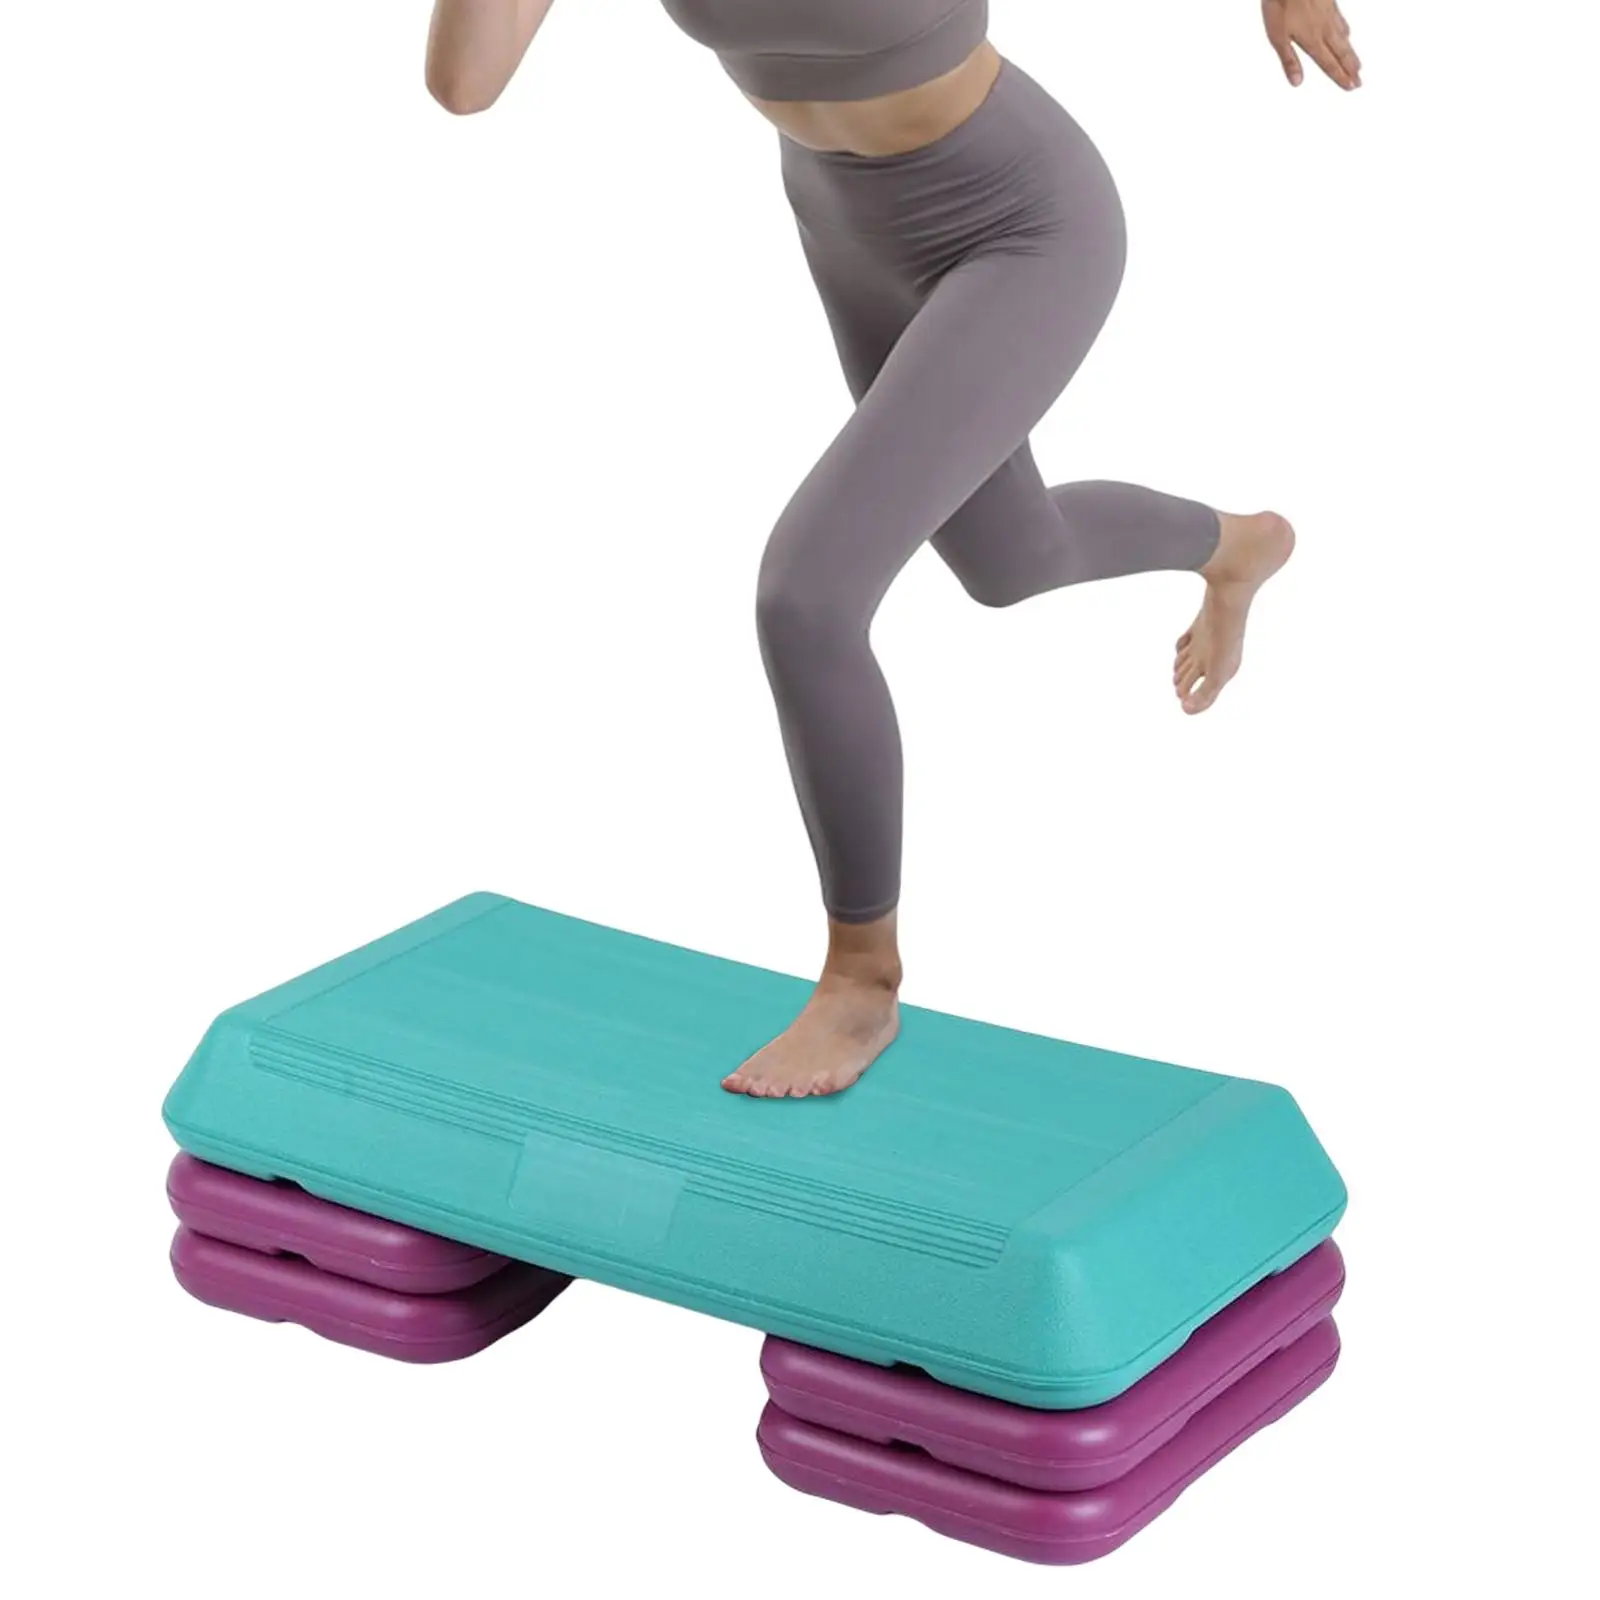 Fitness Pedal Adjustable Portable Durable Board Aerobic Step